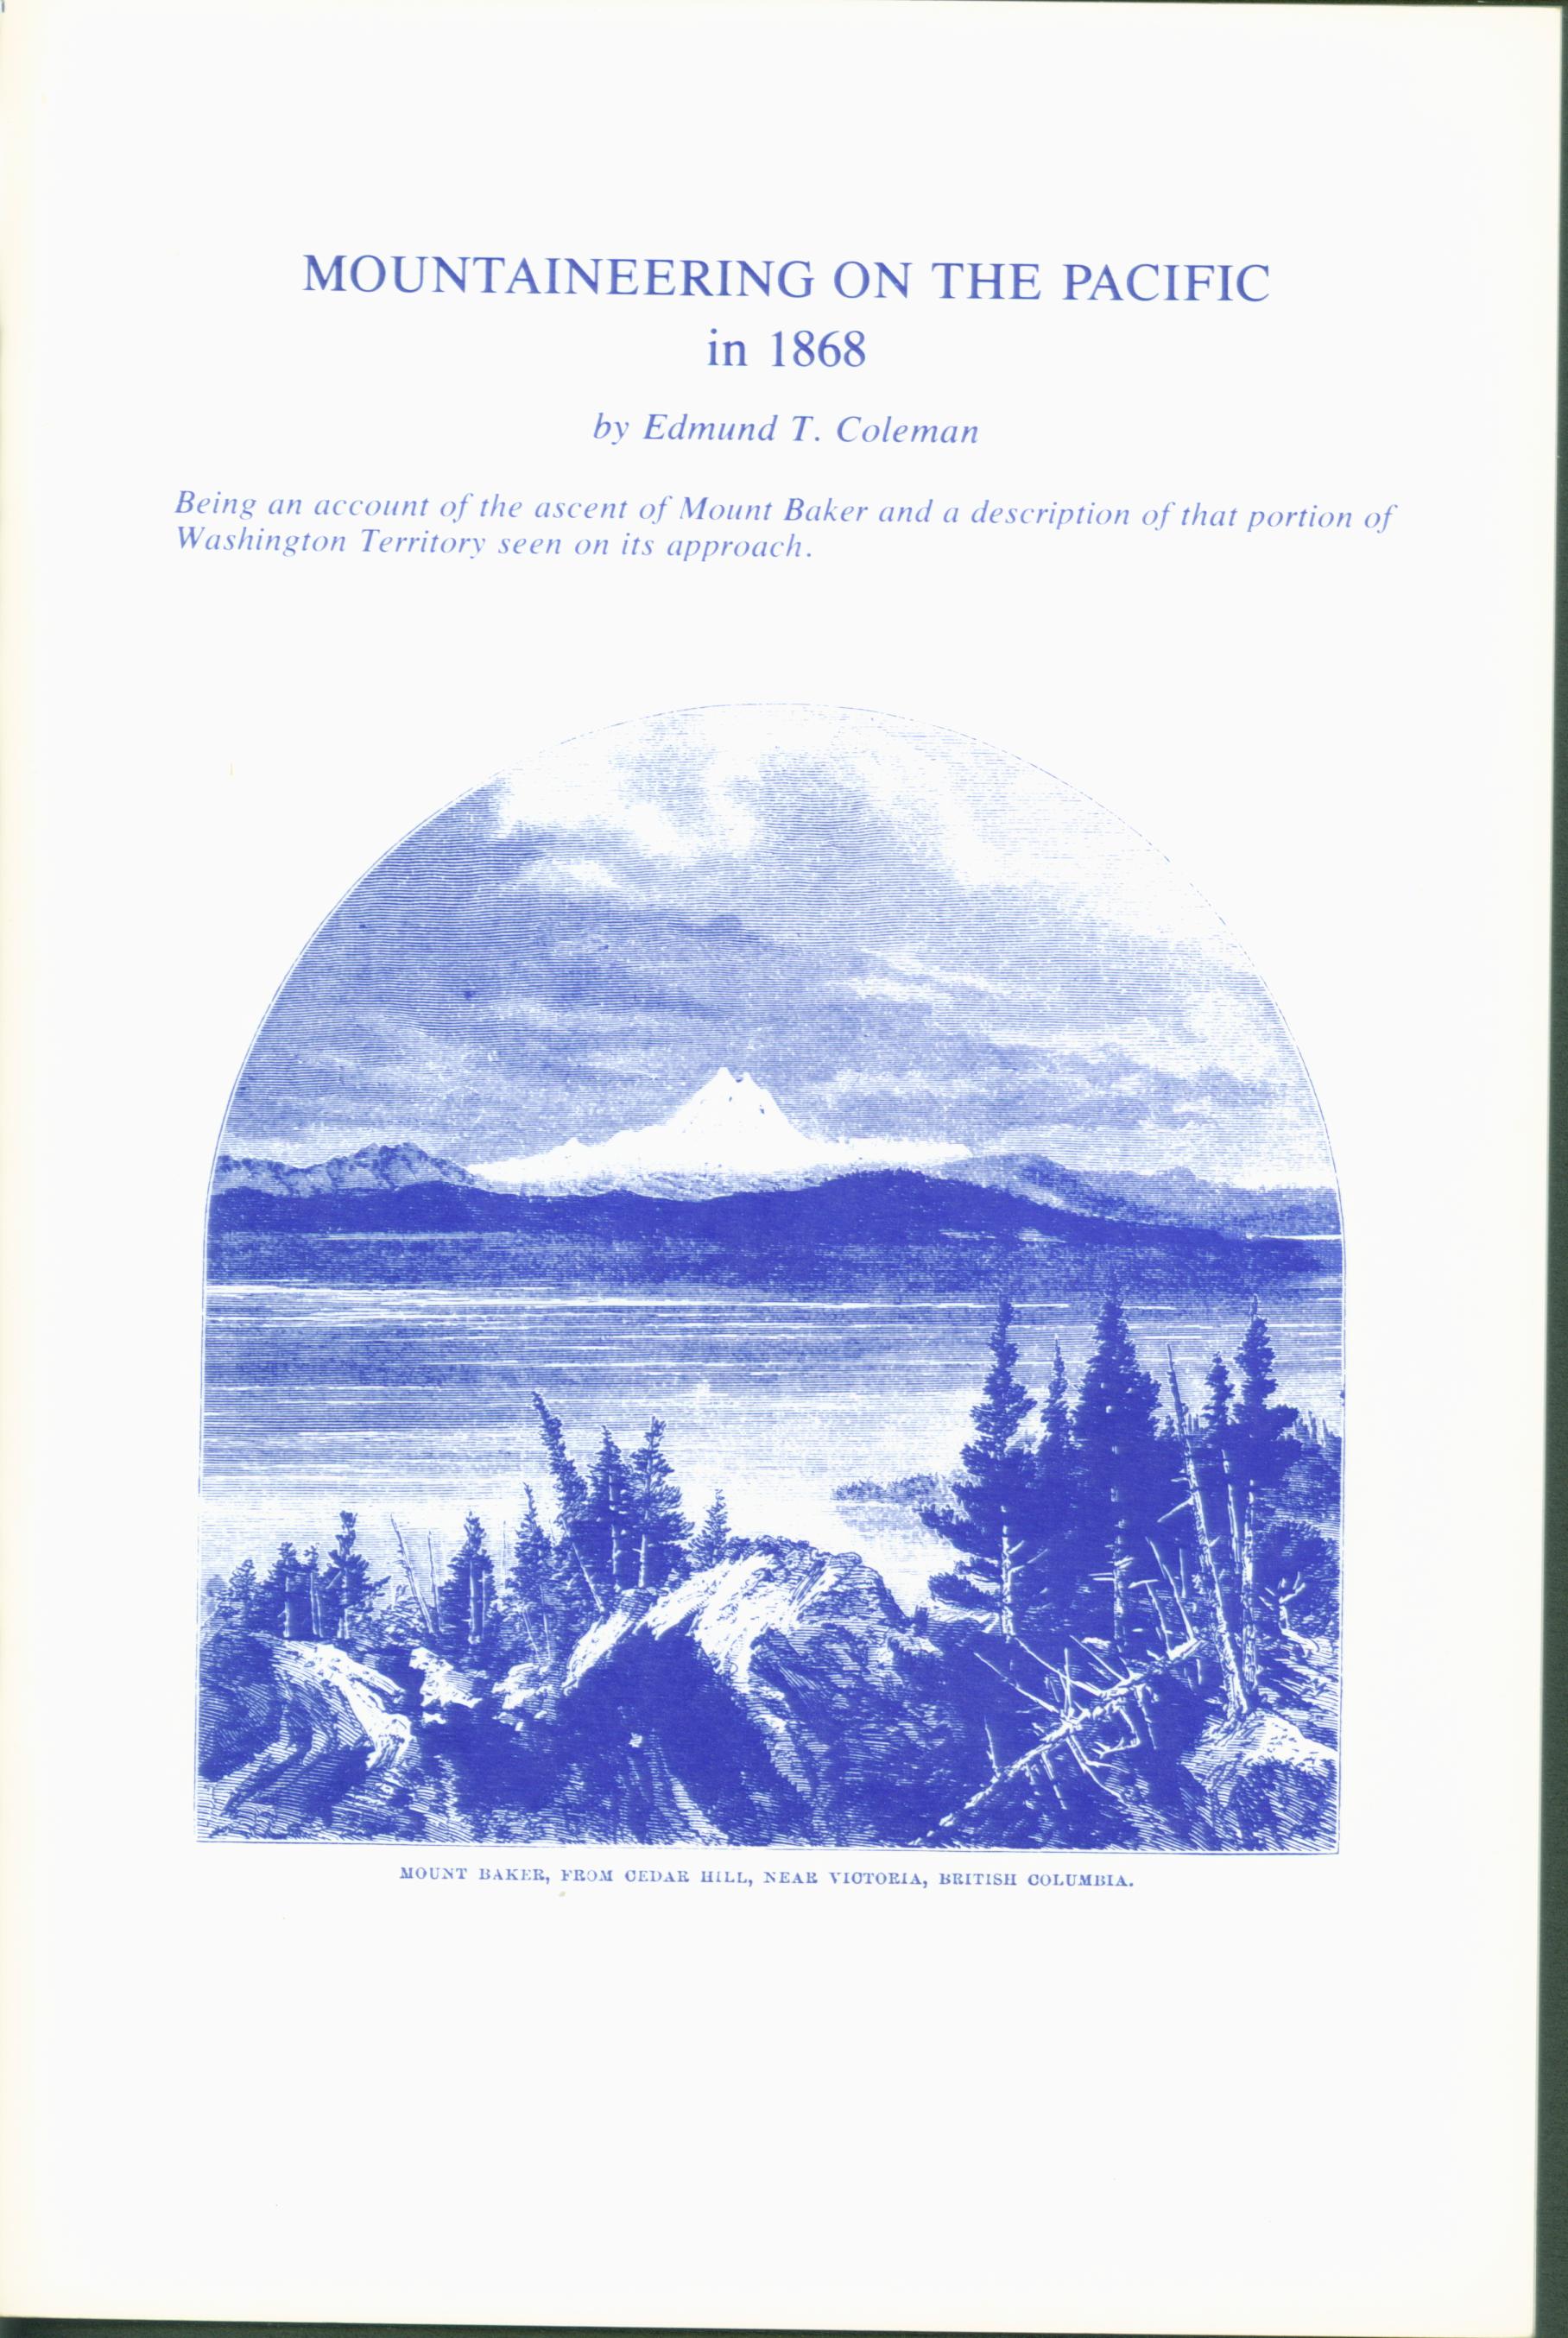 Mountaineering on the Pacific in 1868--ascent of Mt. Baker.